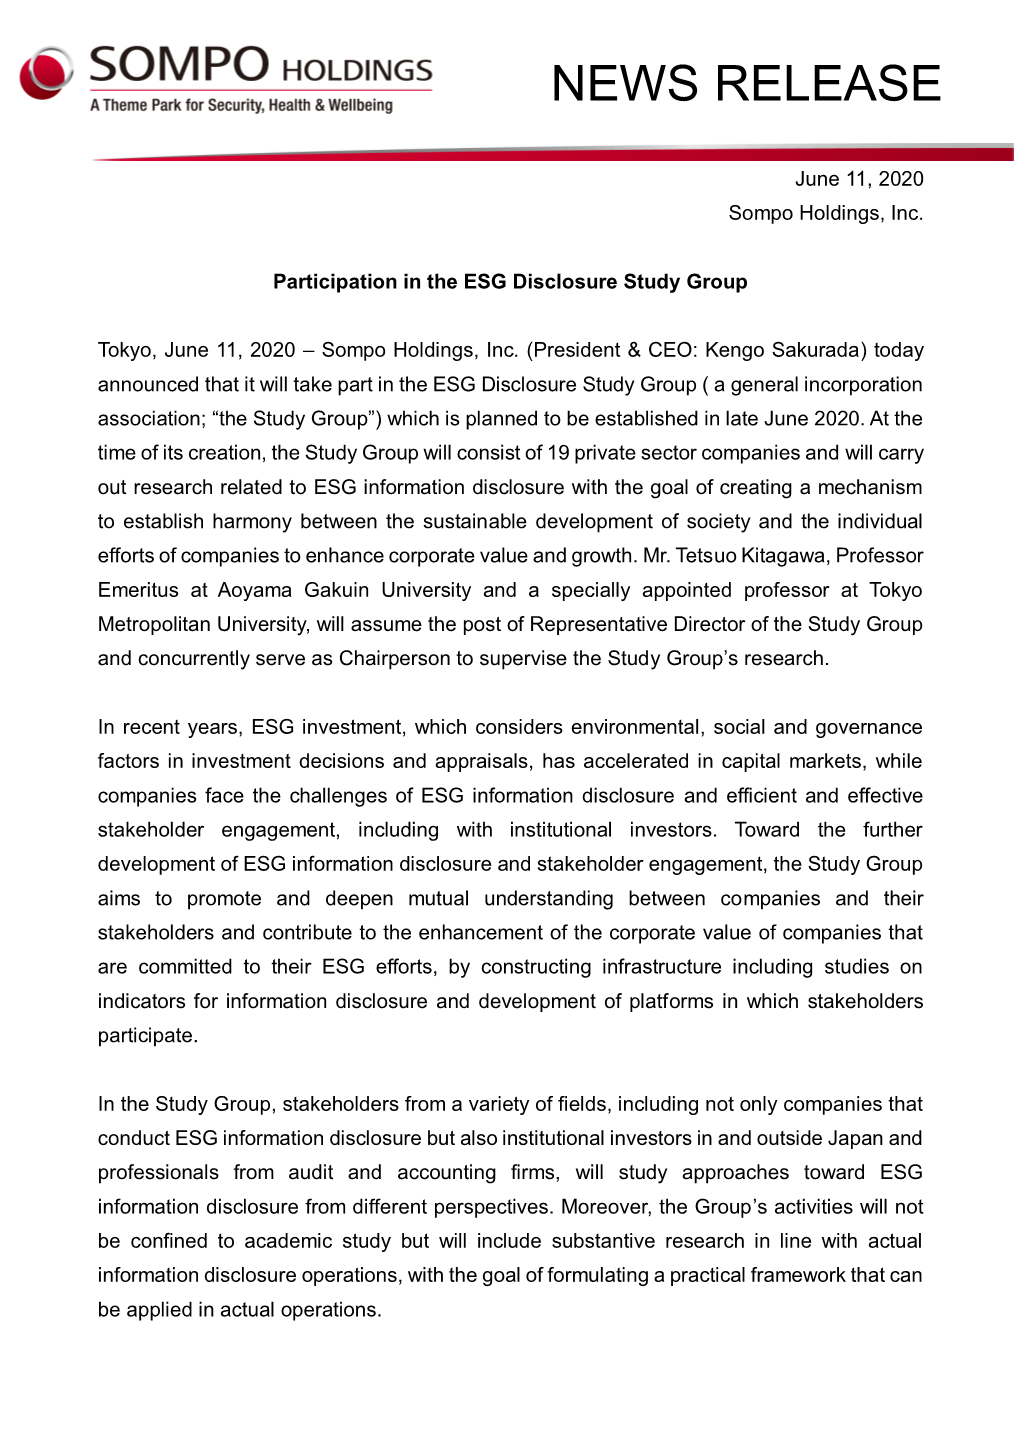 Participation in the ESG Disclosure Study Group(PDF/139KB)